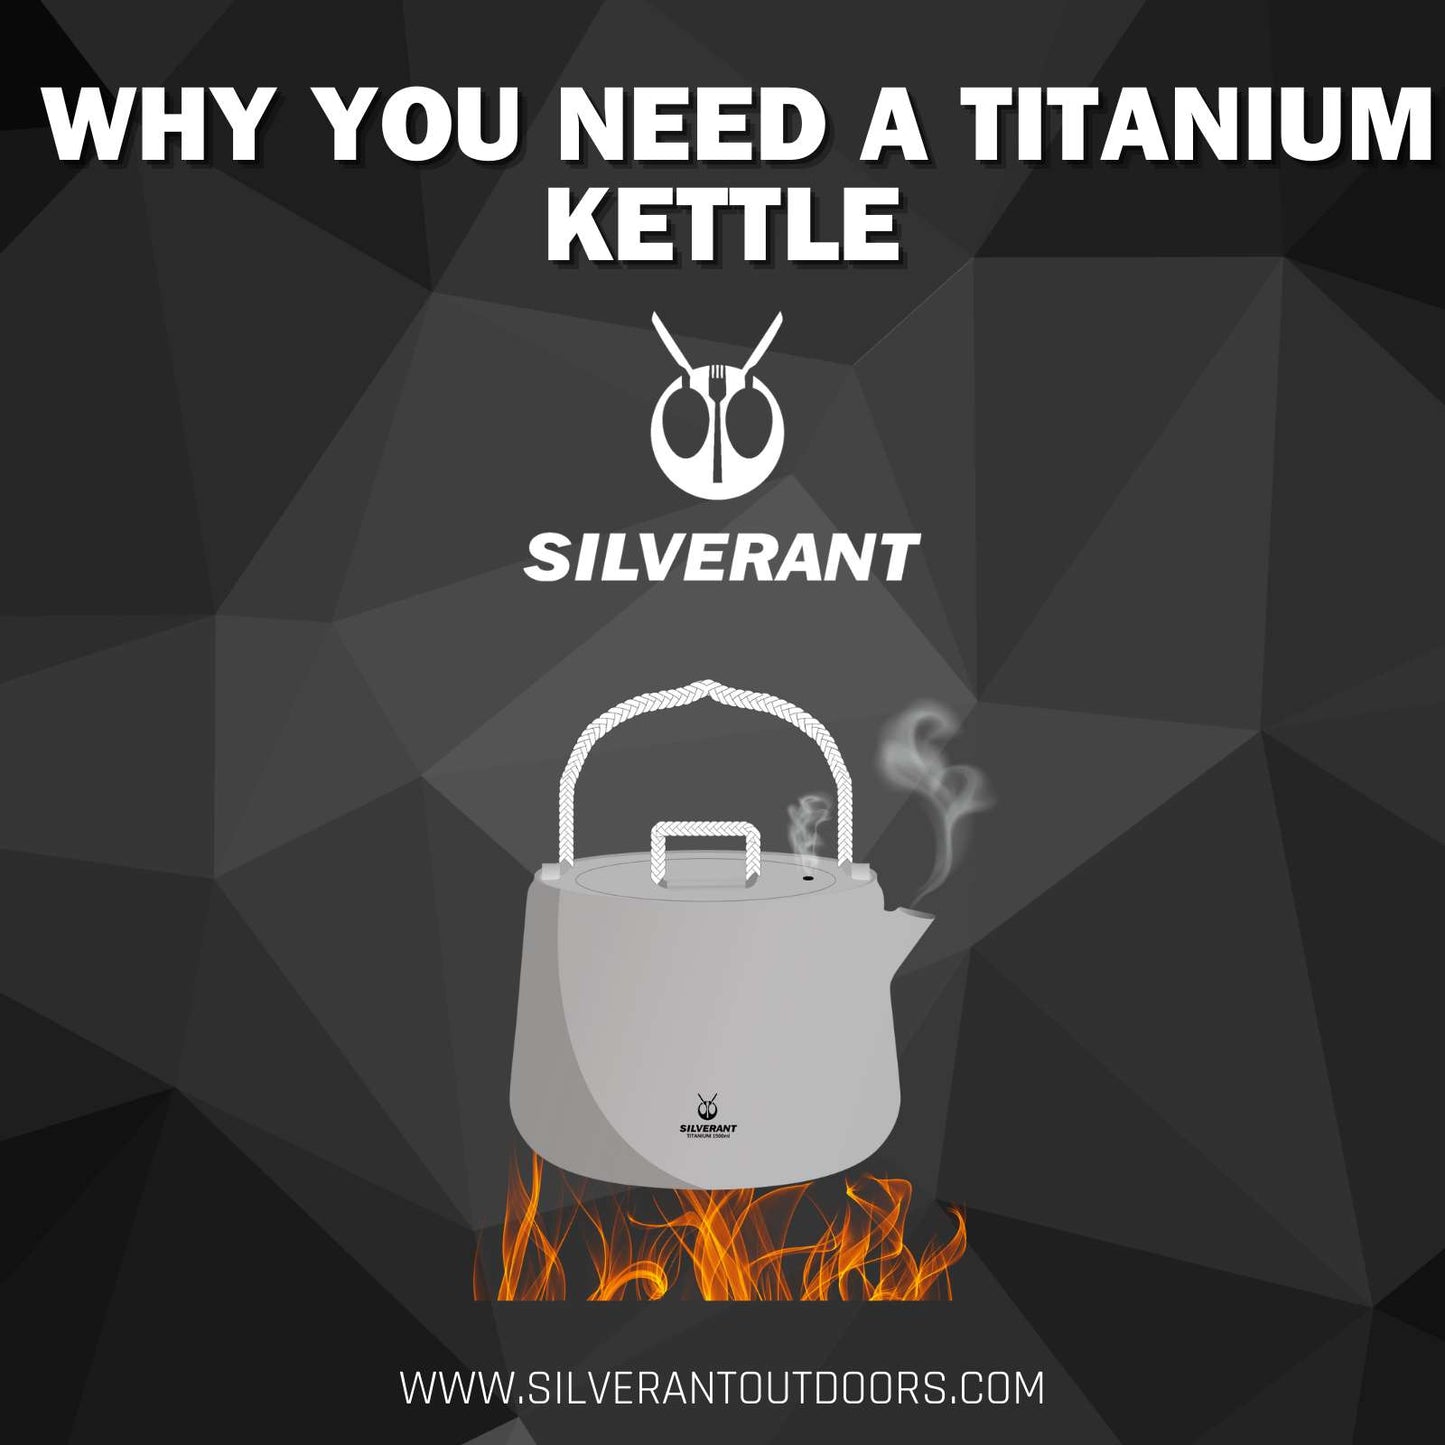 Why You Need A Titanium Kettle?